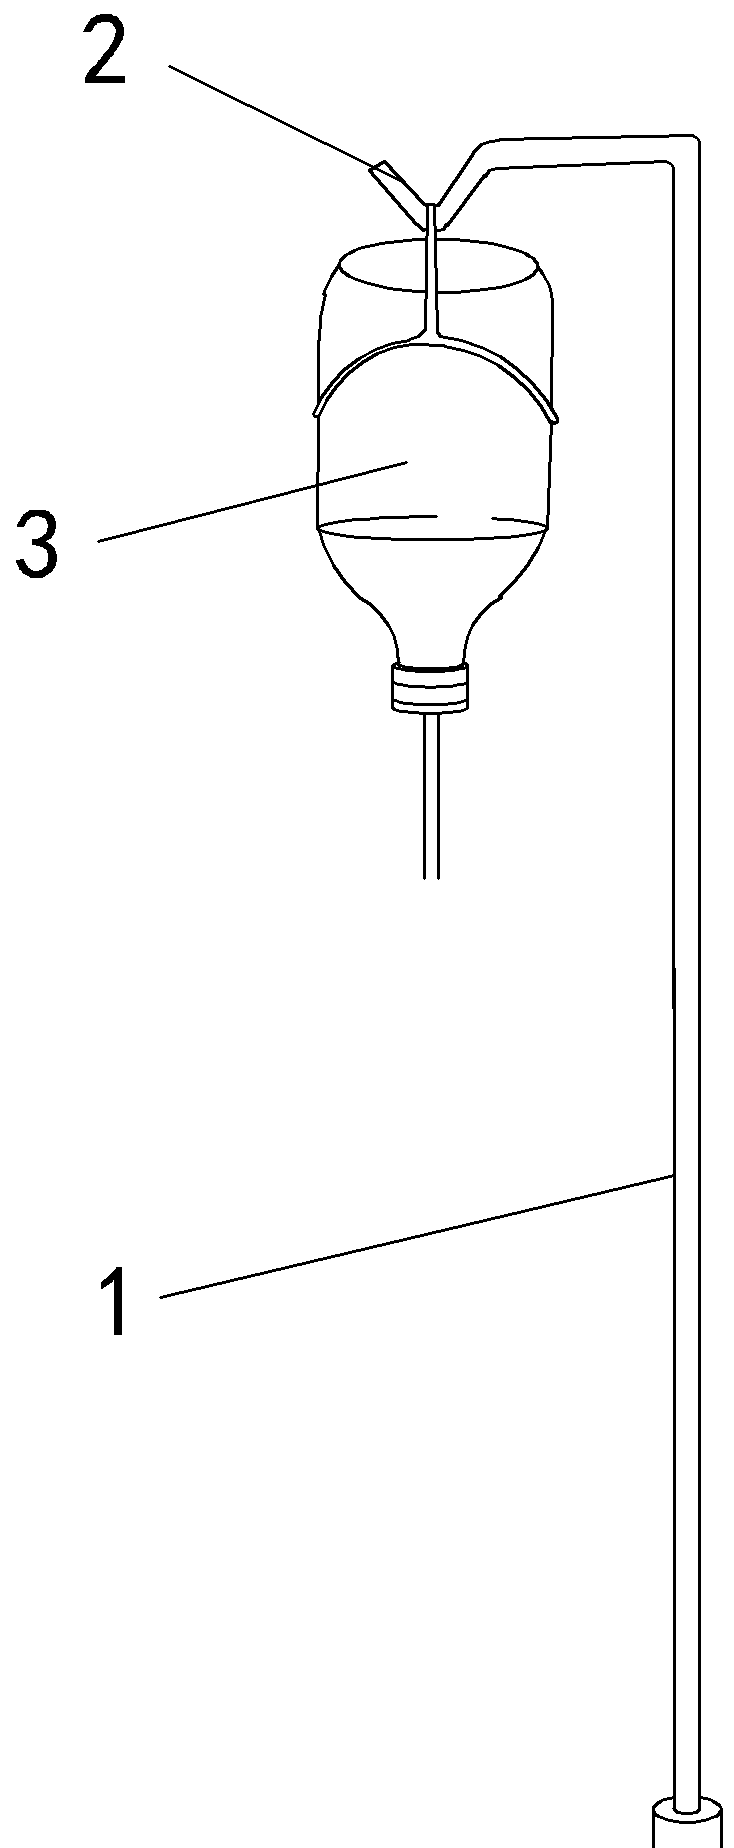 Supporting rod capable of supporting infusion bottle